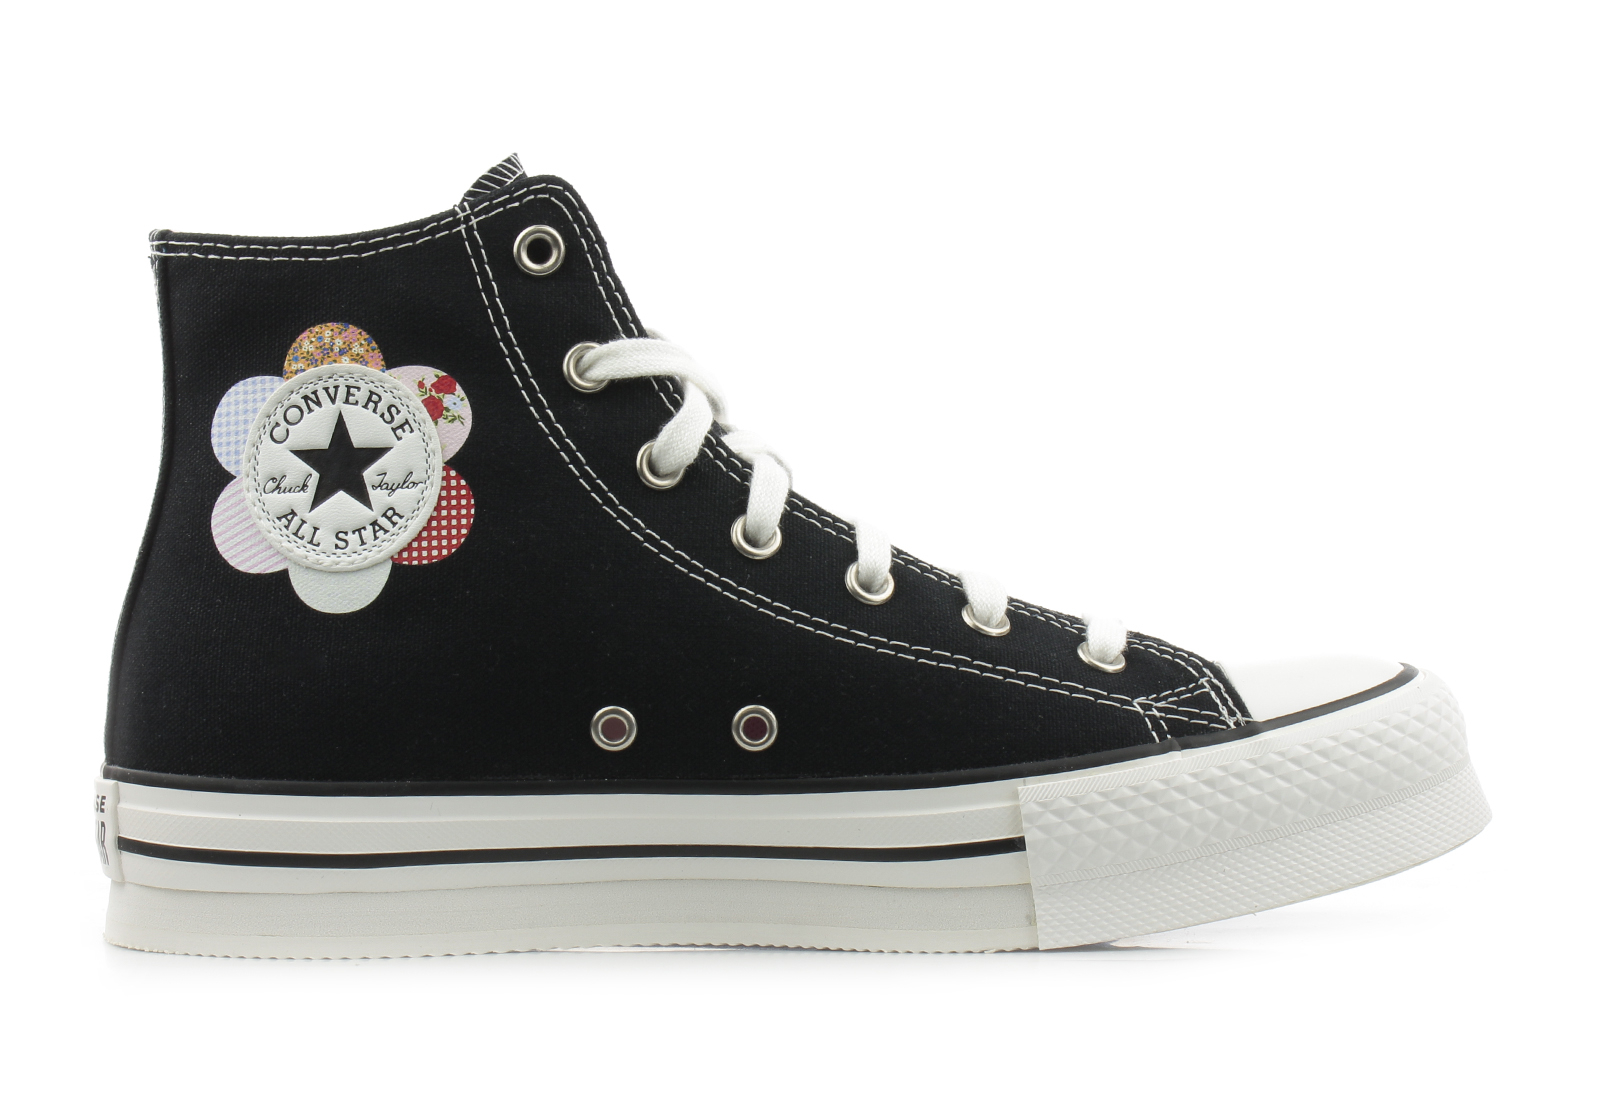 Converse High trainers - Taylor All Star Eva Lift - A05165C - Online shop for sneakers, shoes and